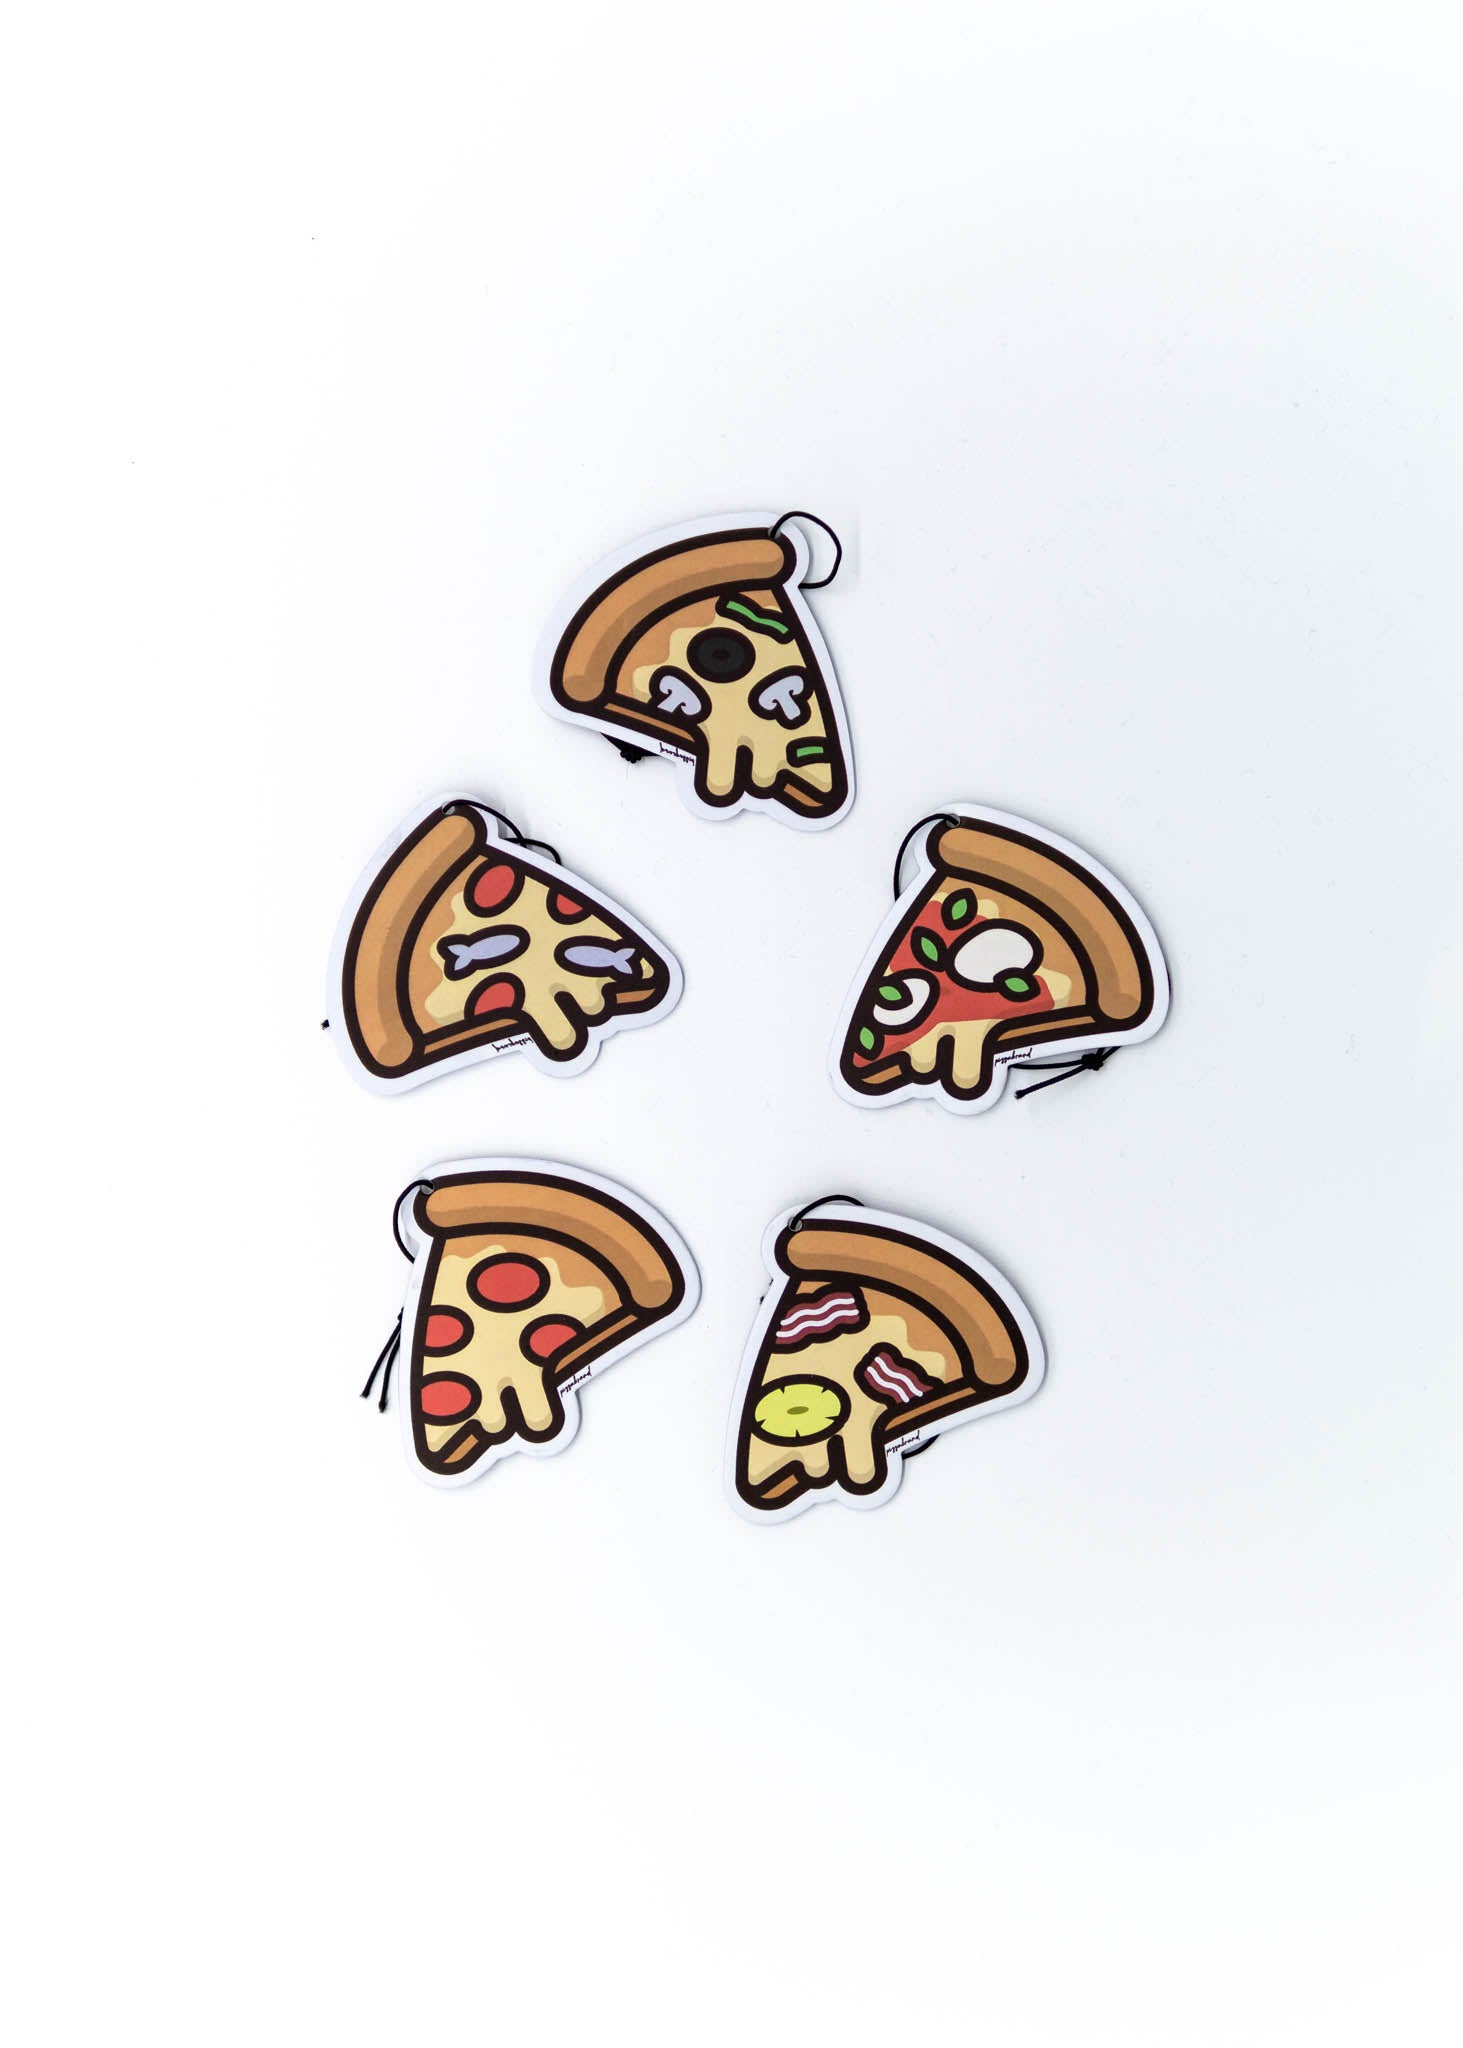 A pizzabrand pizza multipack sampler pack air fresheners. Photo is a close up of the car air freshener with string.